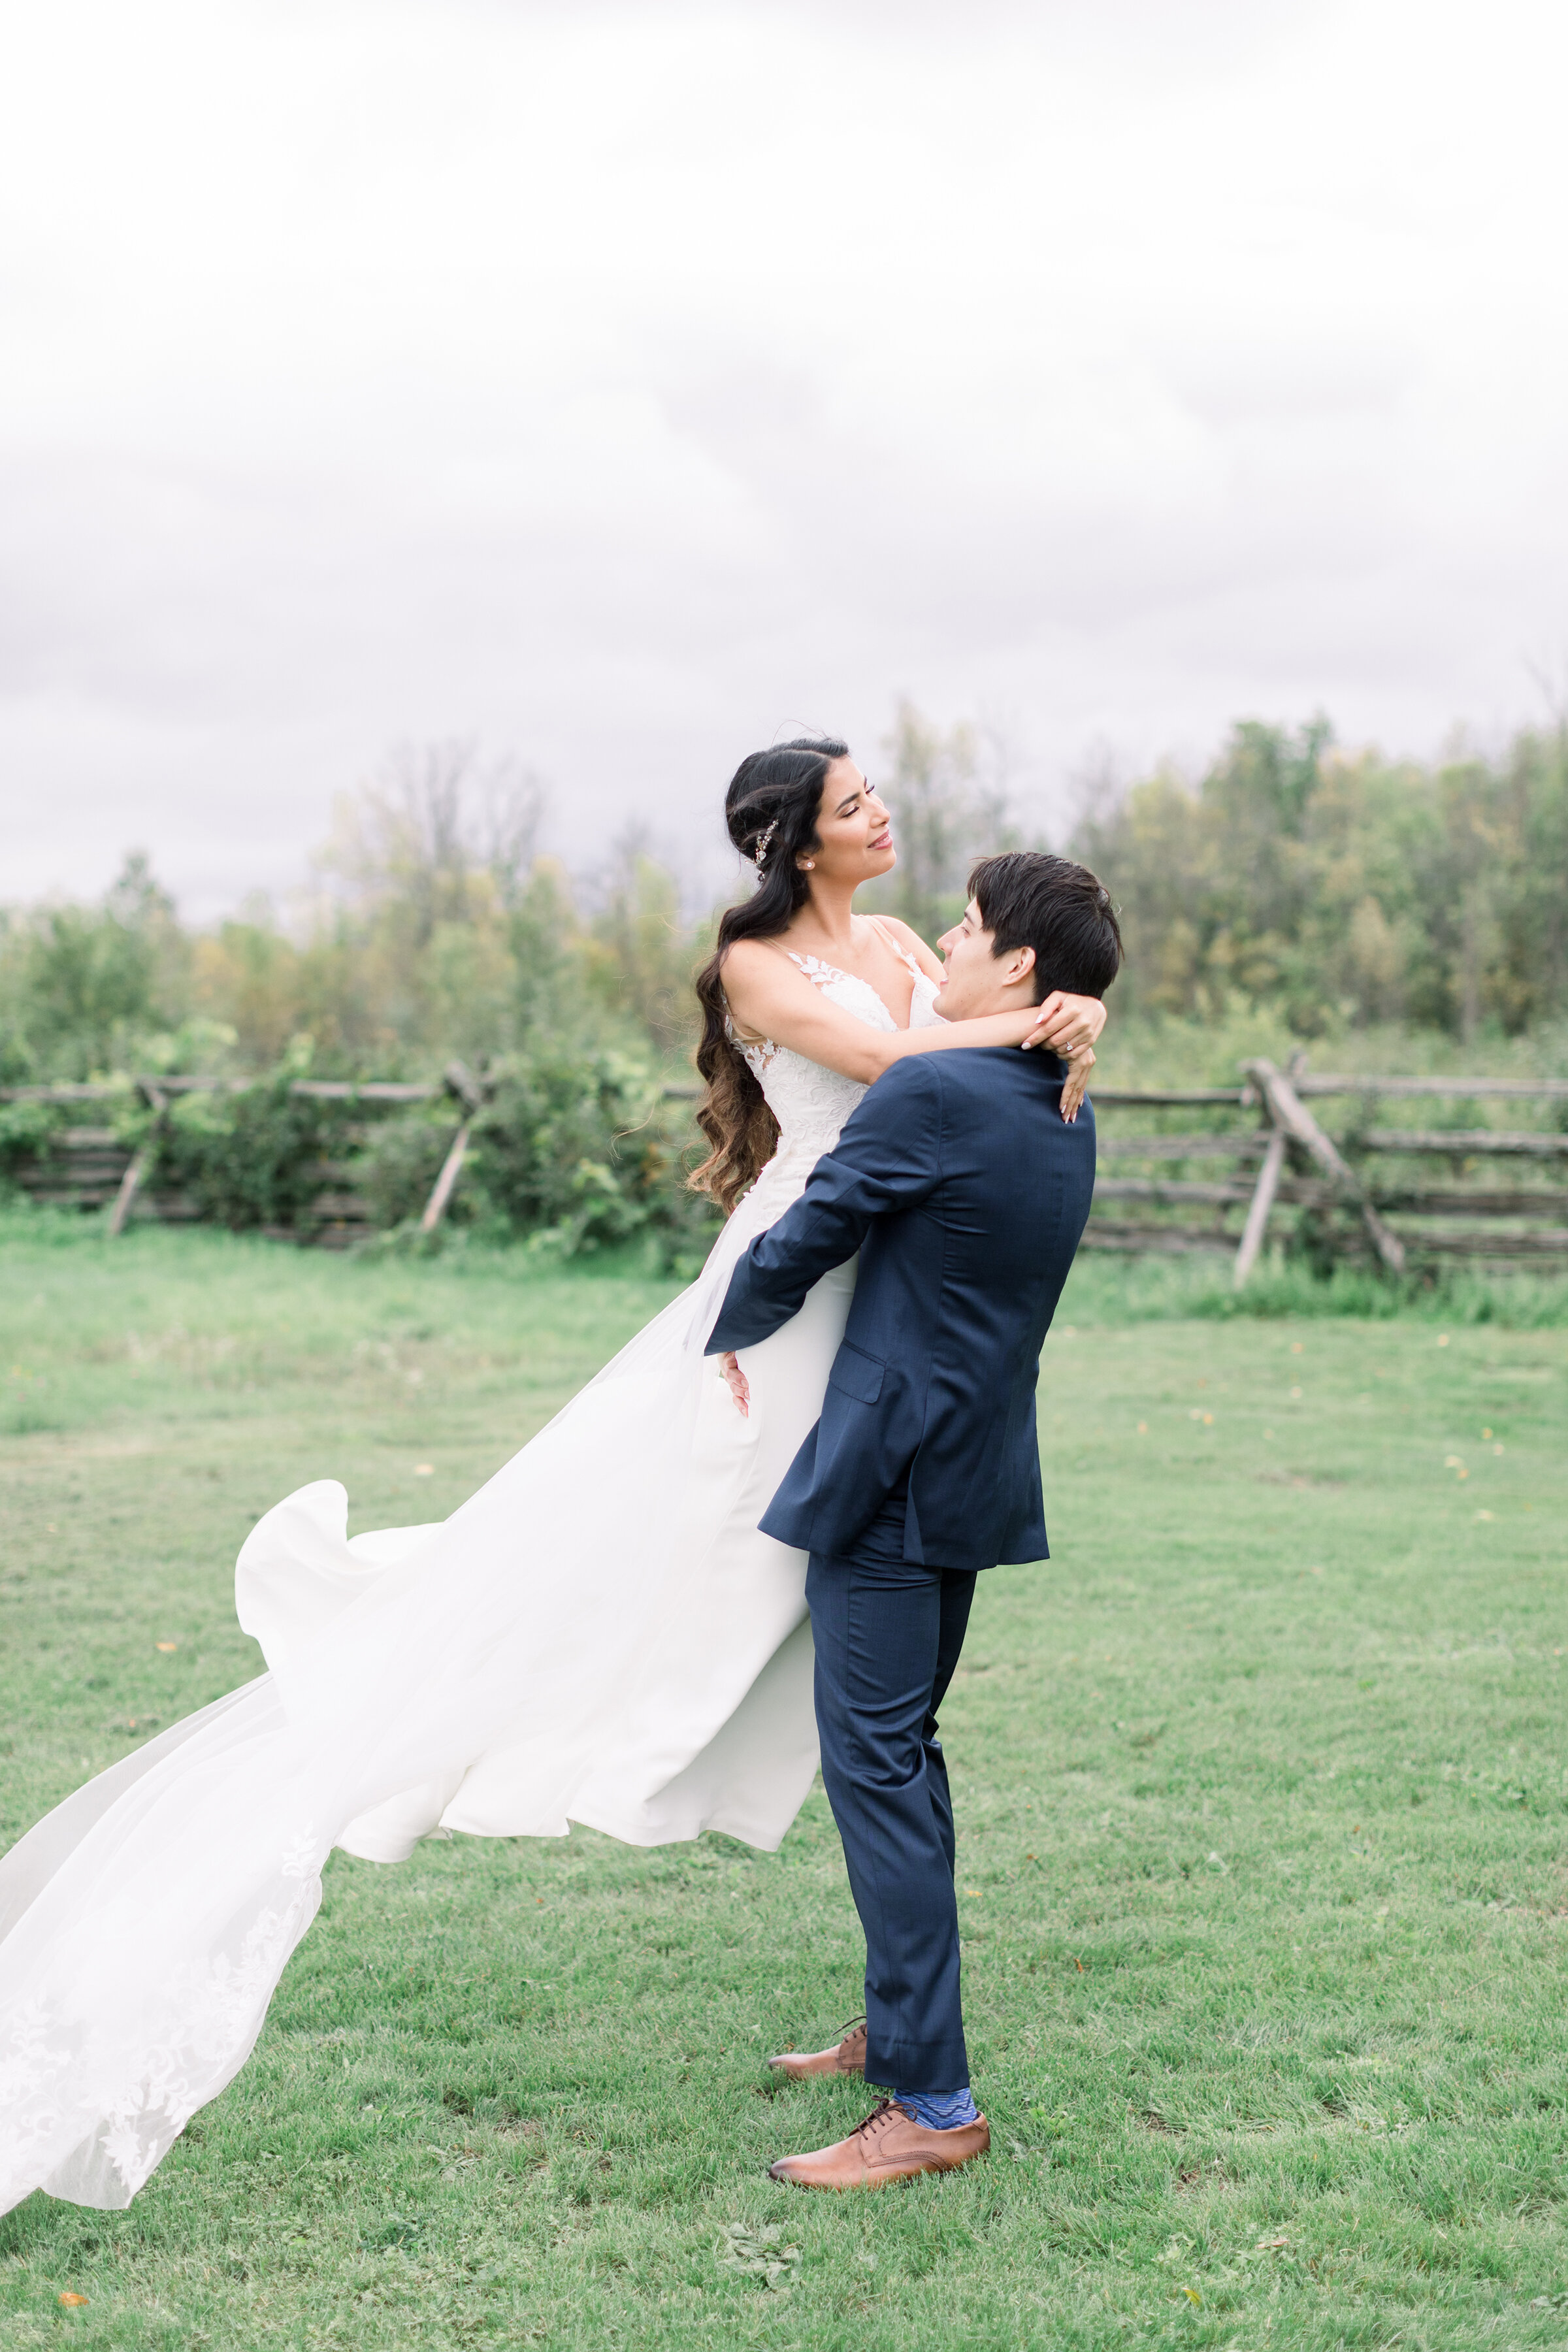  A handsome groom lifts his beautiful bride on the grounds of Stonefields Estates, Carleton Place, Ottawa in a before the wedding styled photo shoot by Chelsea Mason Photography. Couple pose inspiration ideas and goals bridal aesthetic inspiration id